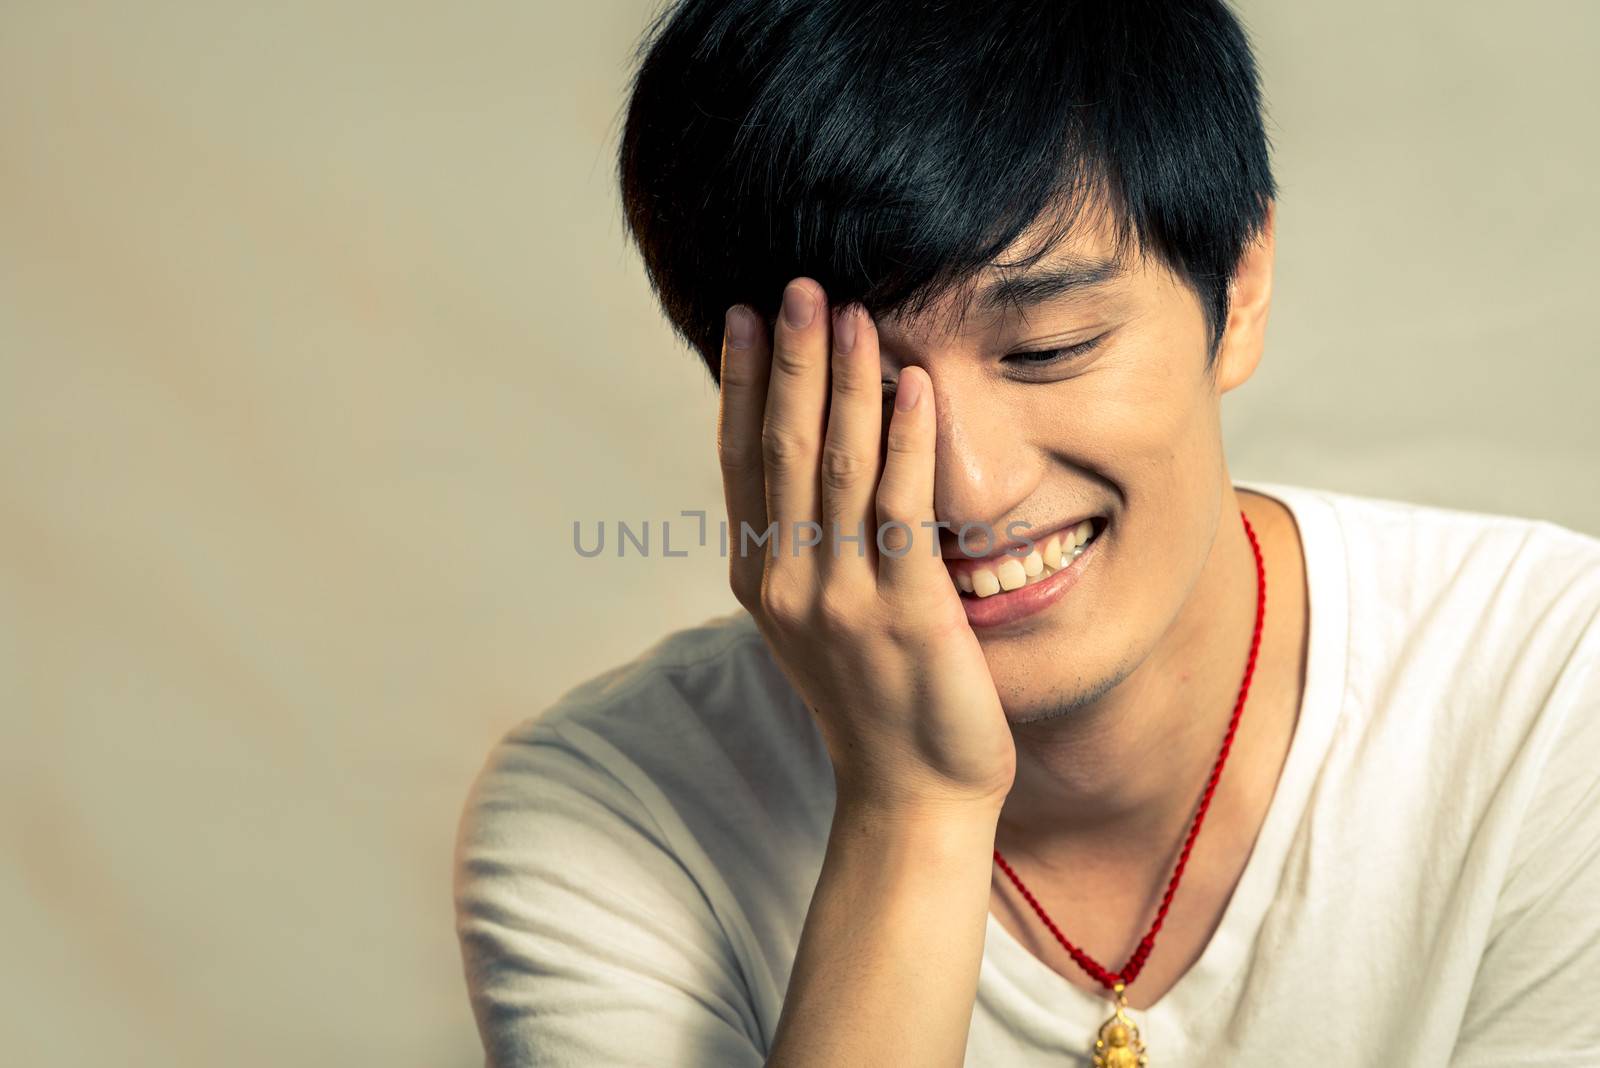 Young man covering his face and smiling, with fashion tone and background